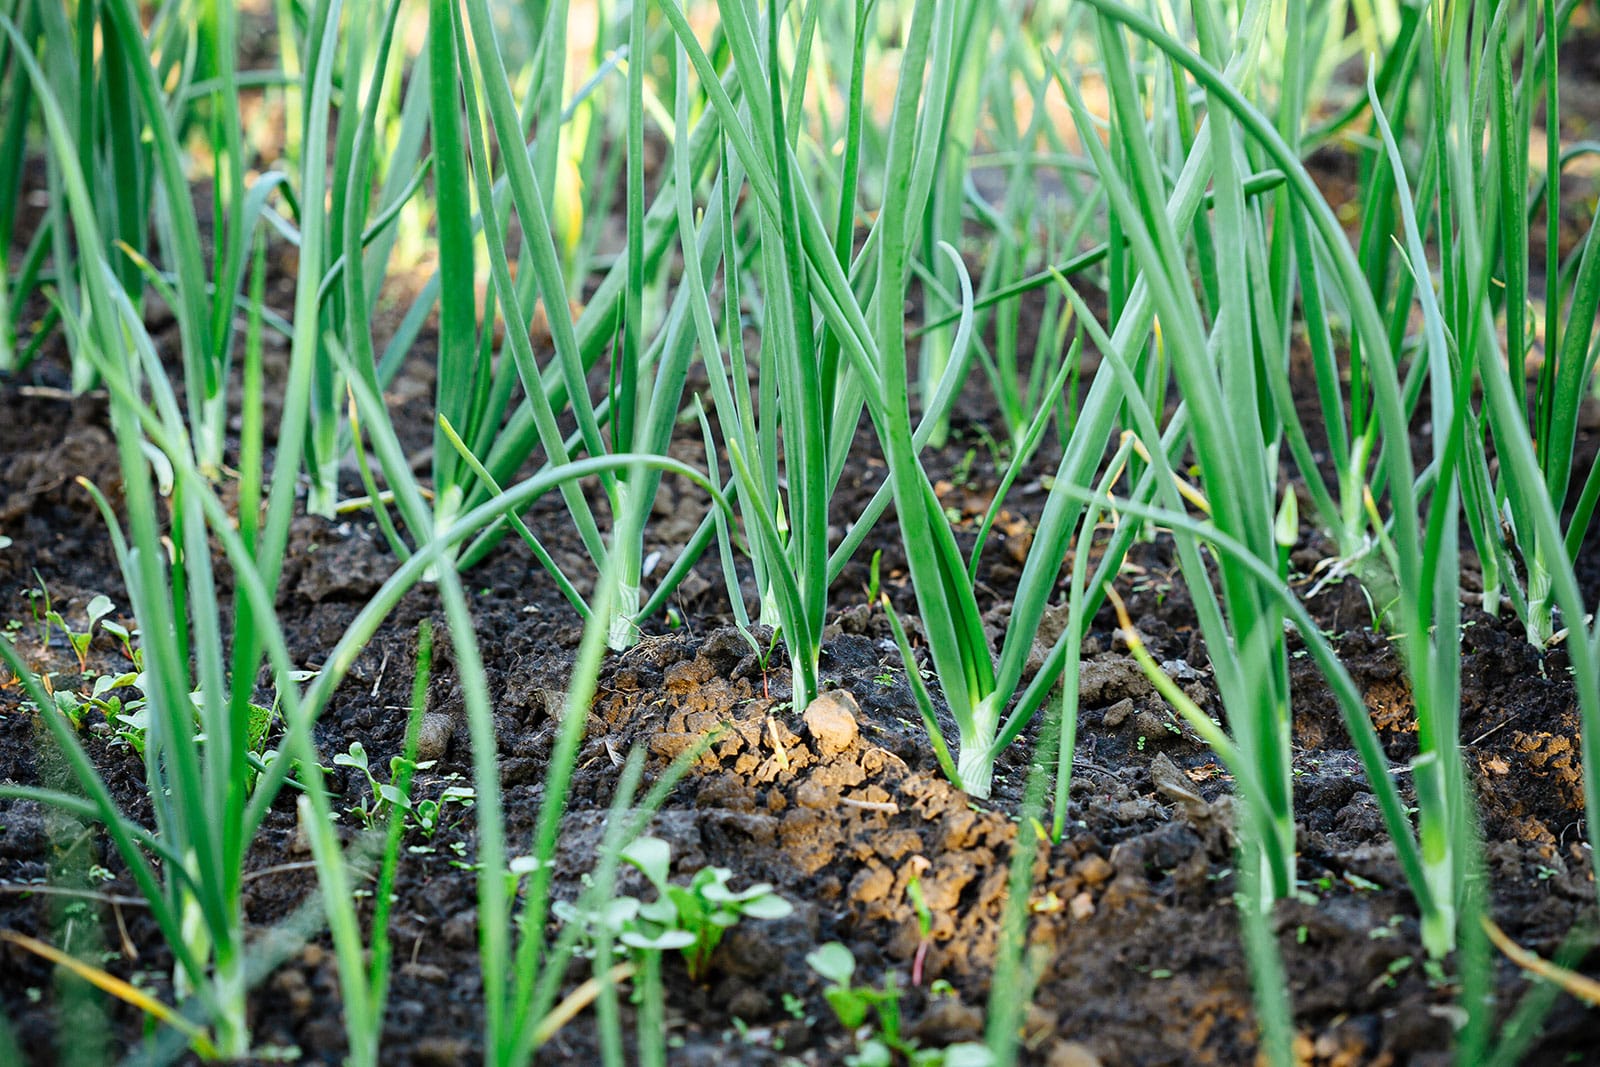 Welsh onions in a garden bed